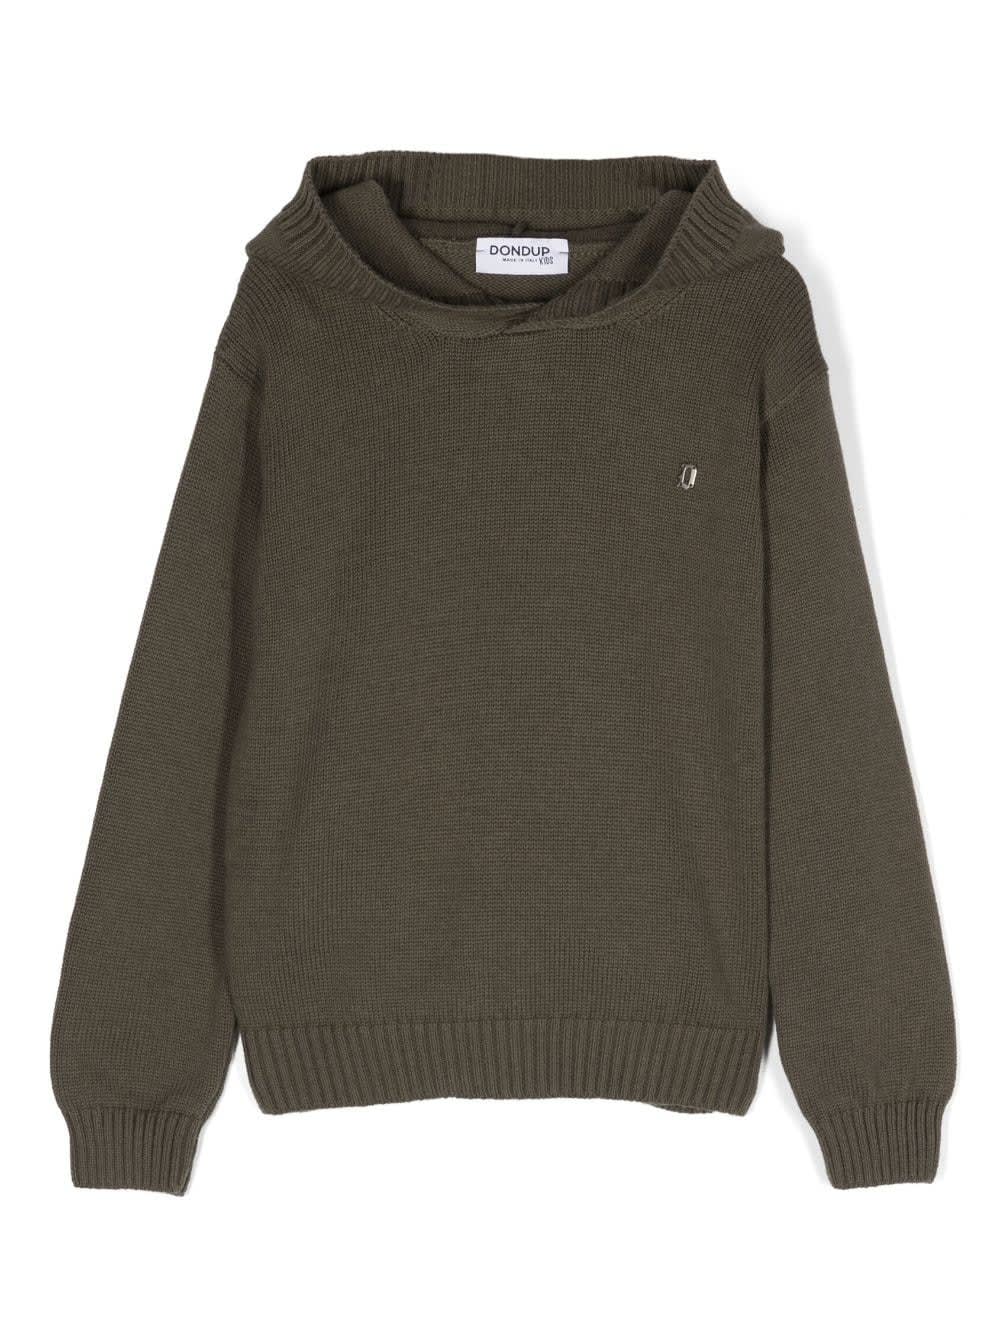 DONDUP OLIVE GREEN KNITTED HOODED PULLOVER